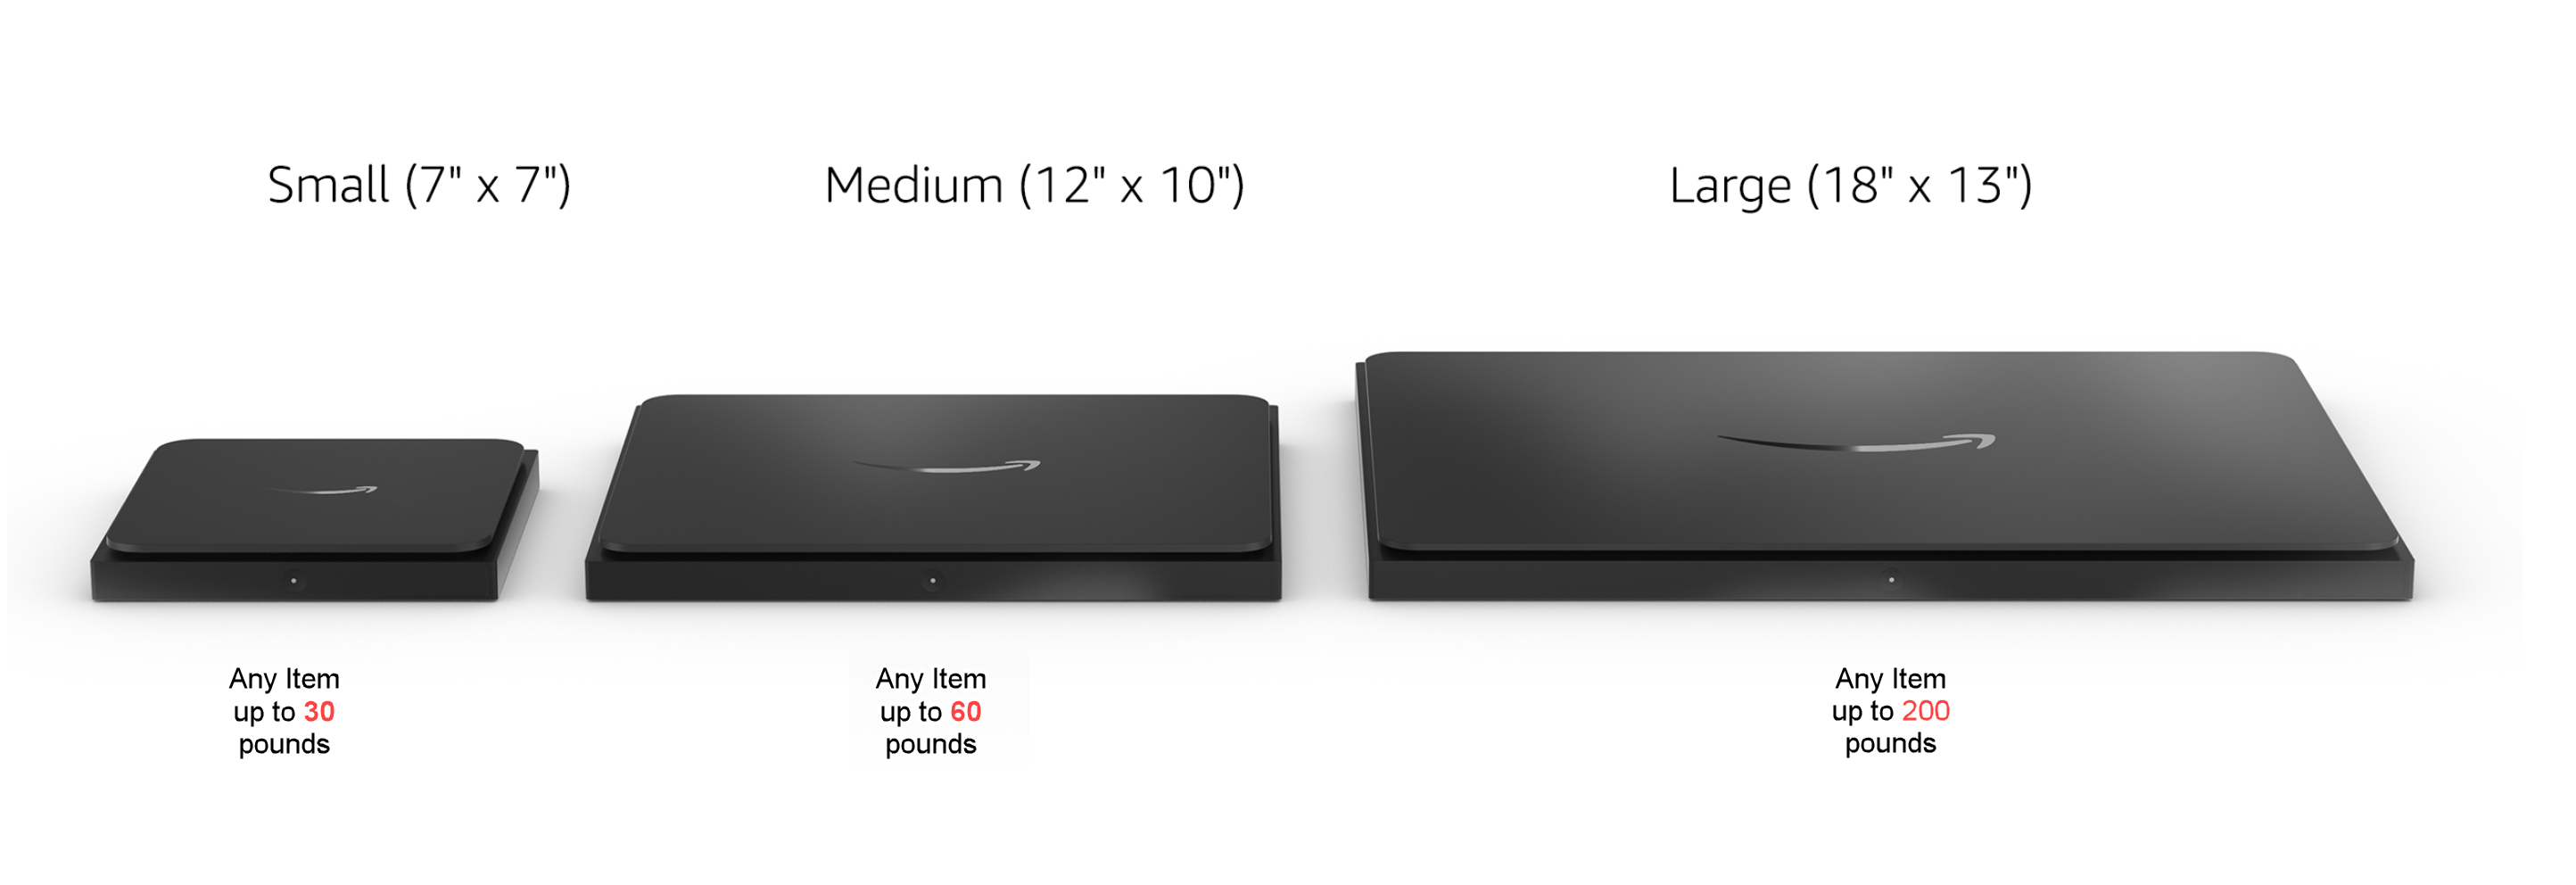 Small, medium and large sizes of the Amazon Dash Smart Shelf for IoT weight-based inventory replenishment